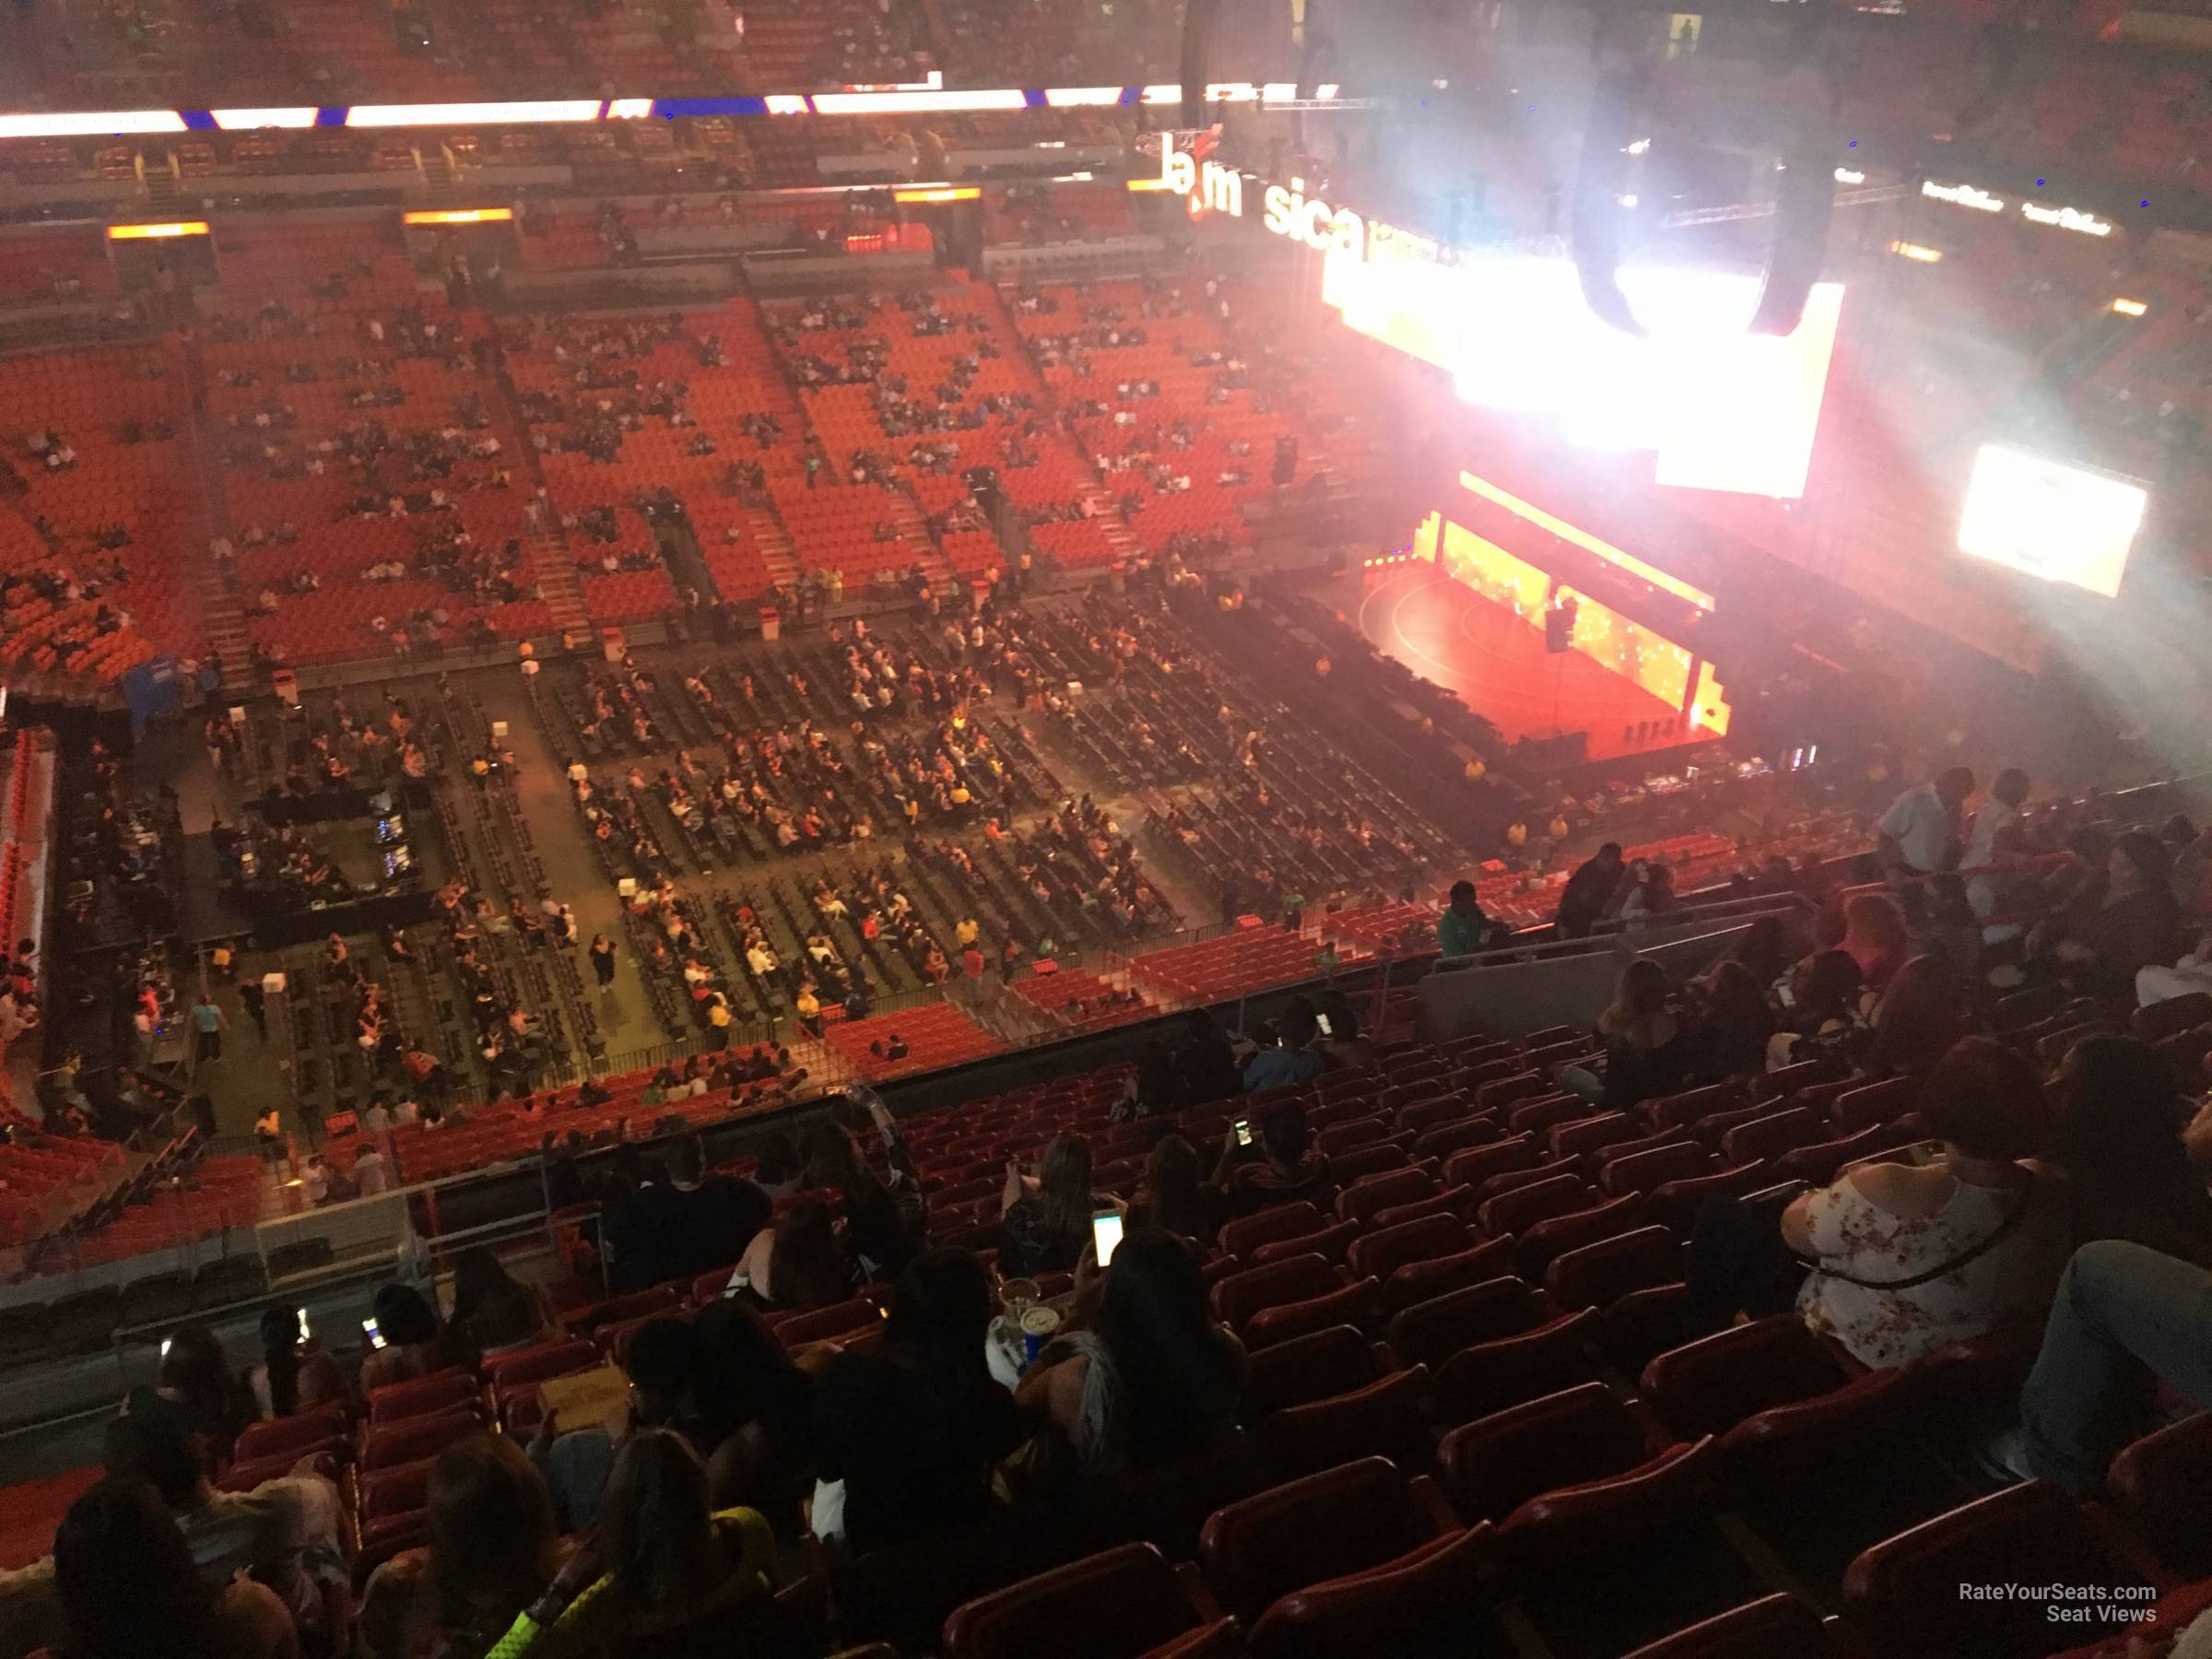 section 309, row 18 seat view  for concert - kaseya center